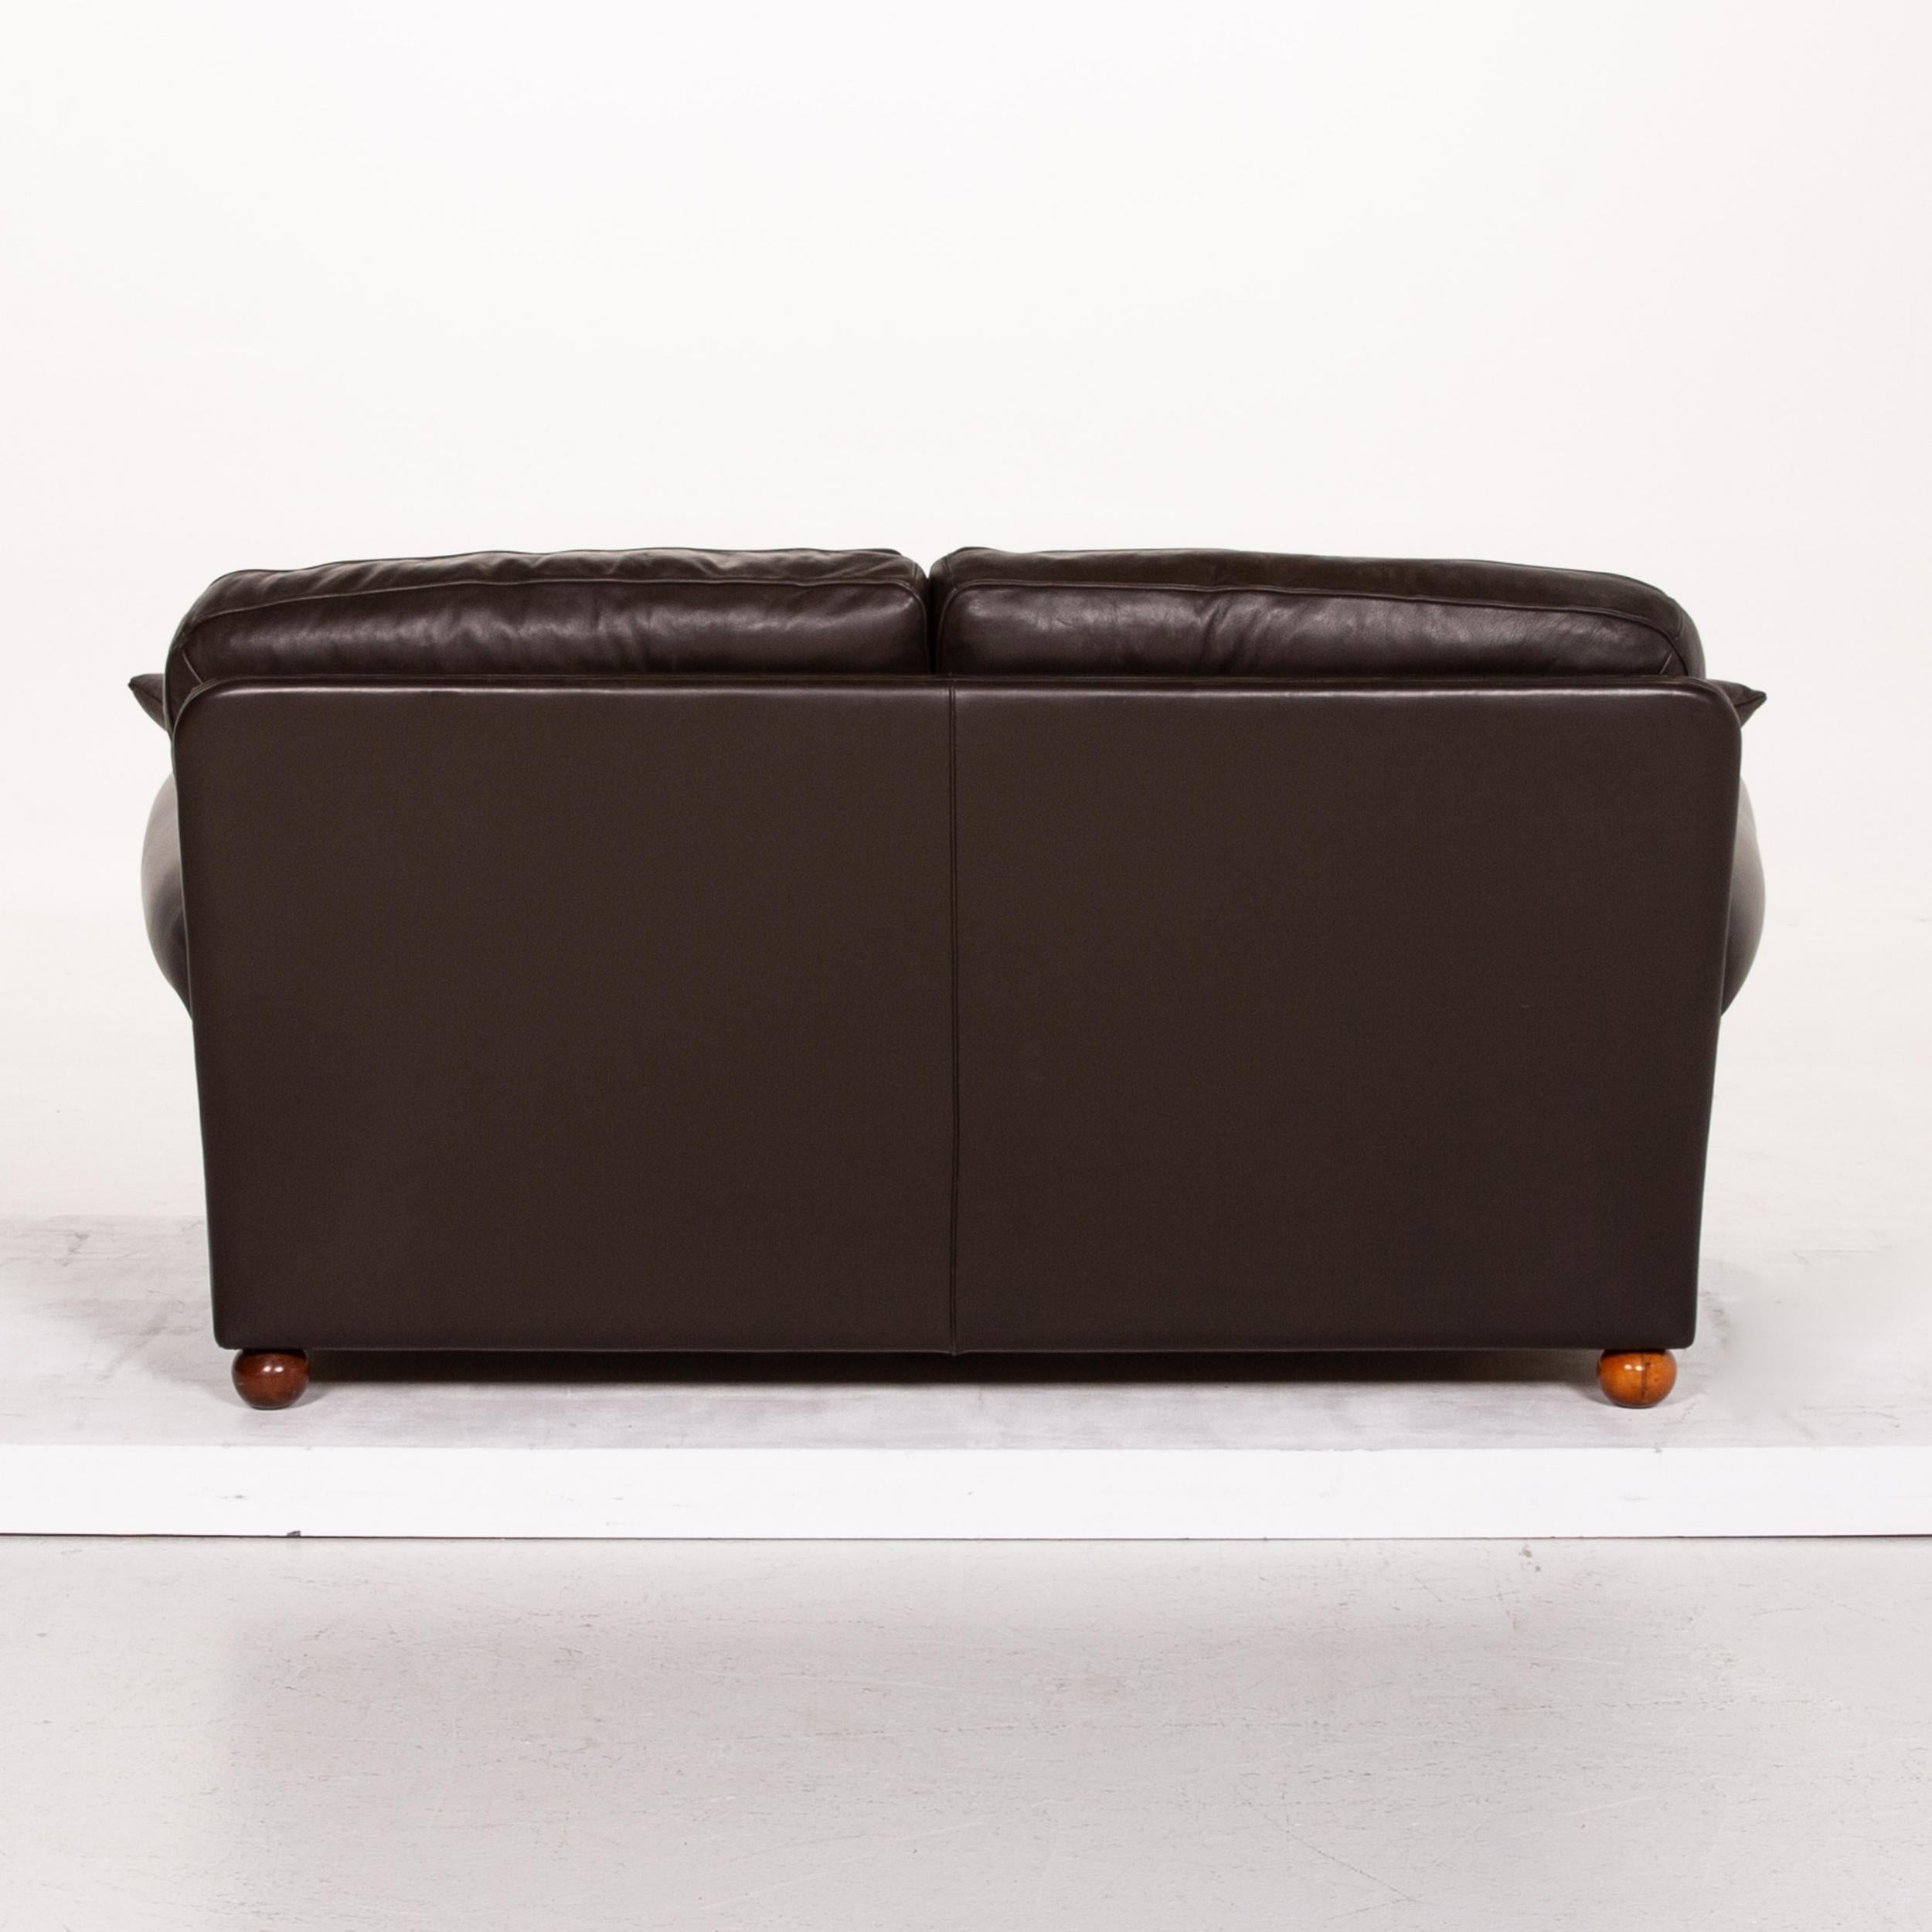 Poltrona Frau Leather Sofa Dark Brown Brown Two-Seat Couch 3